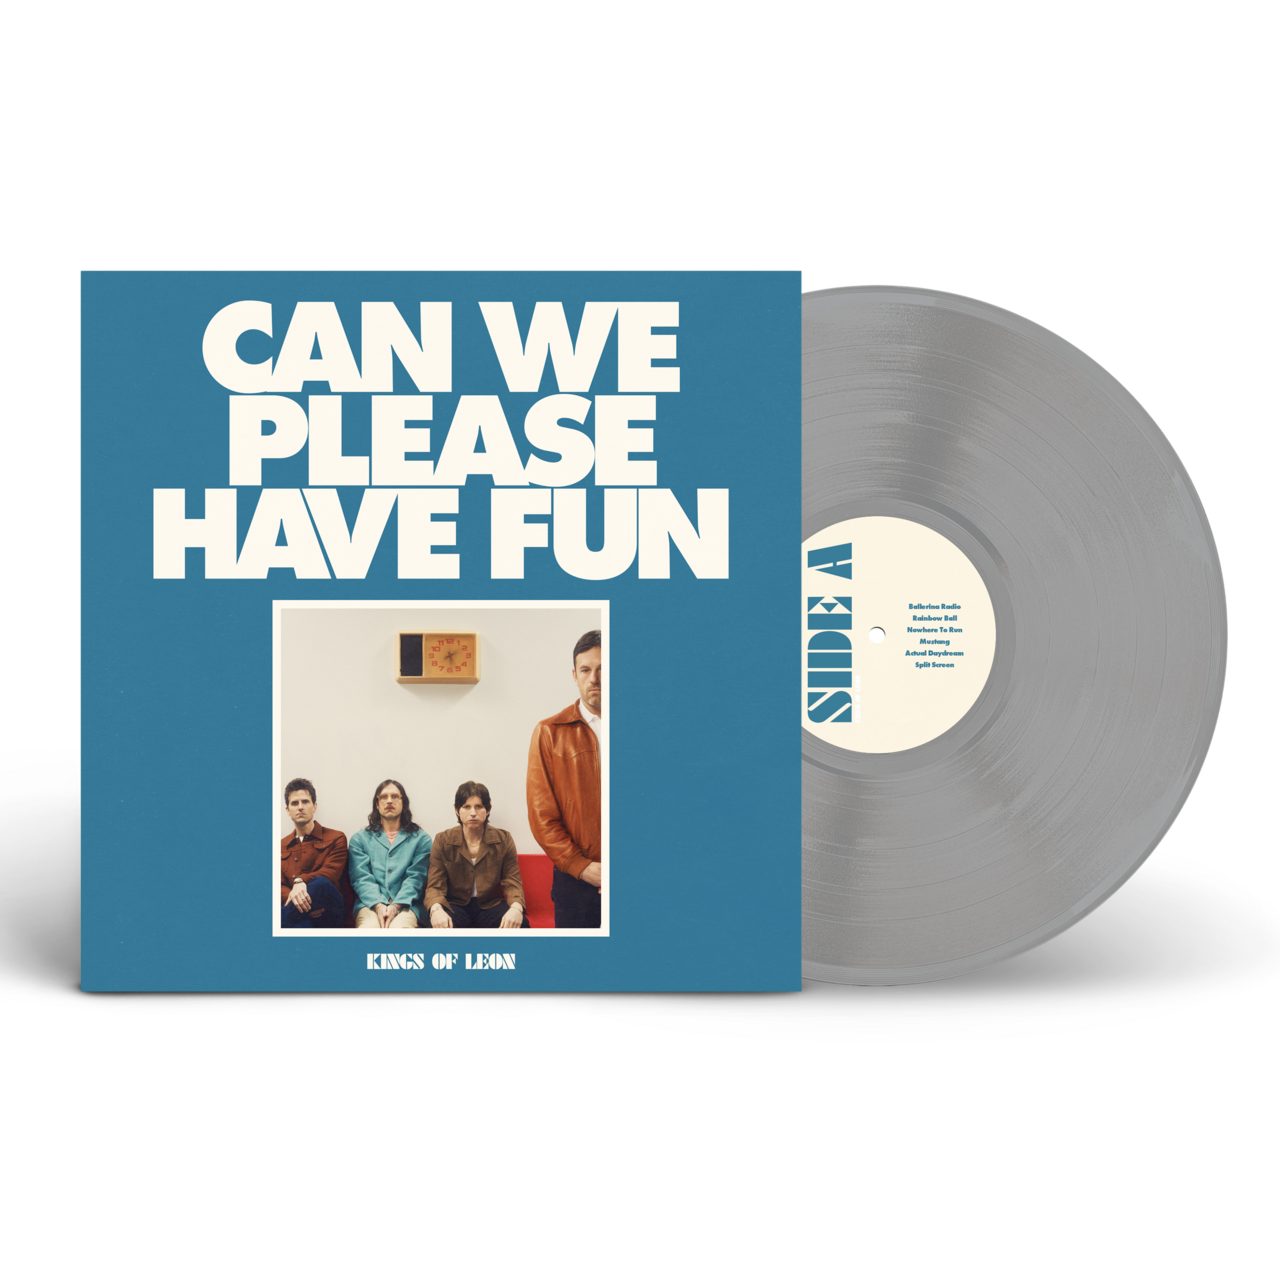 Can We Please Have Fun: Limited Silver Vinyl LP, CD + Signed Art Card